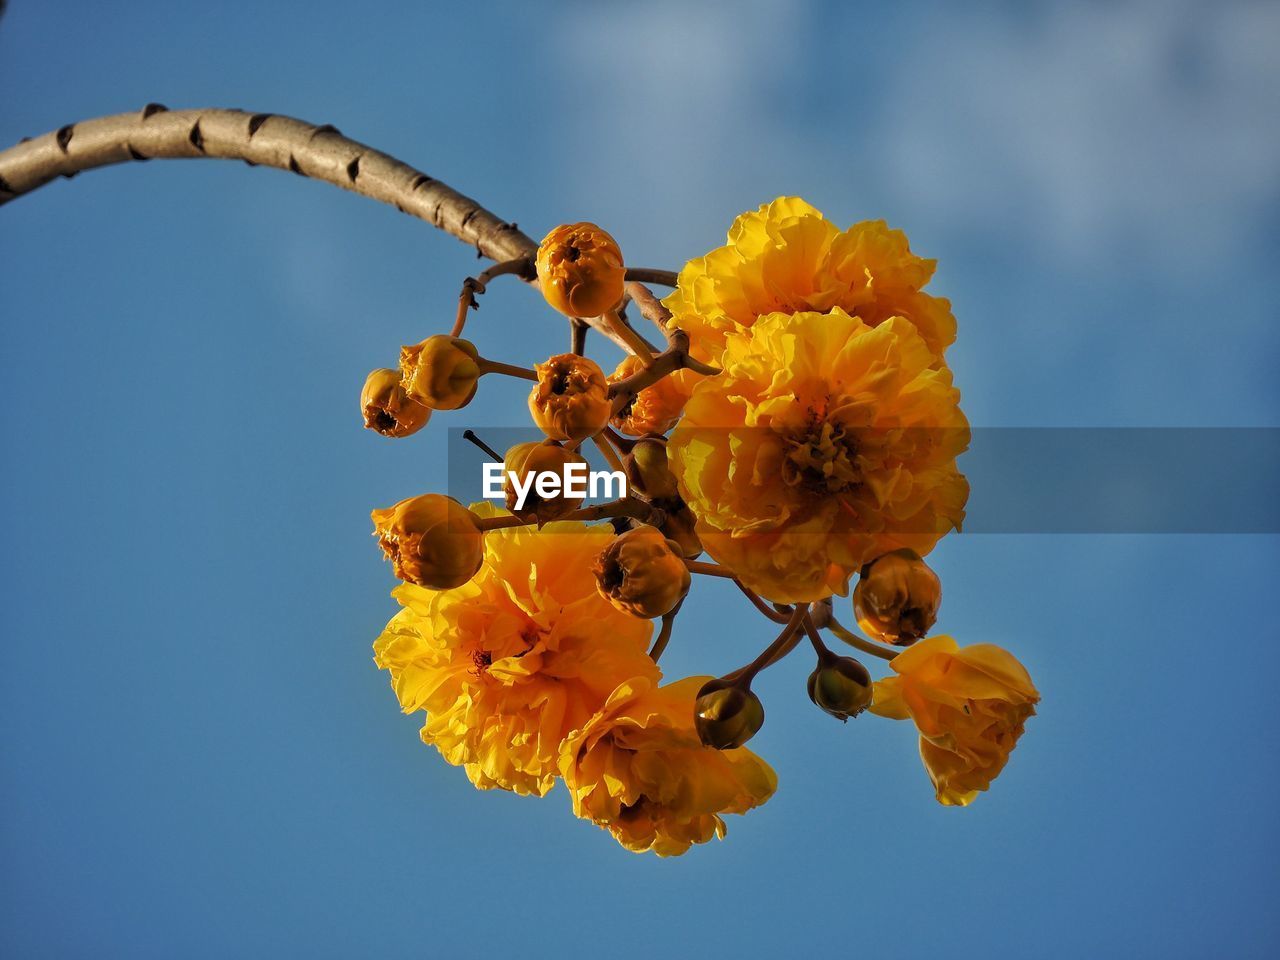 CLOSE-UP OF YELLOW FLOWERING PLANTS AGAINST BLUE SKY